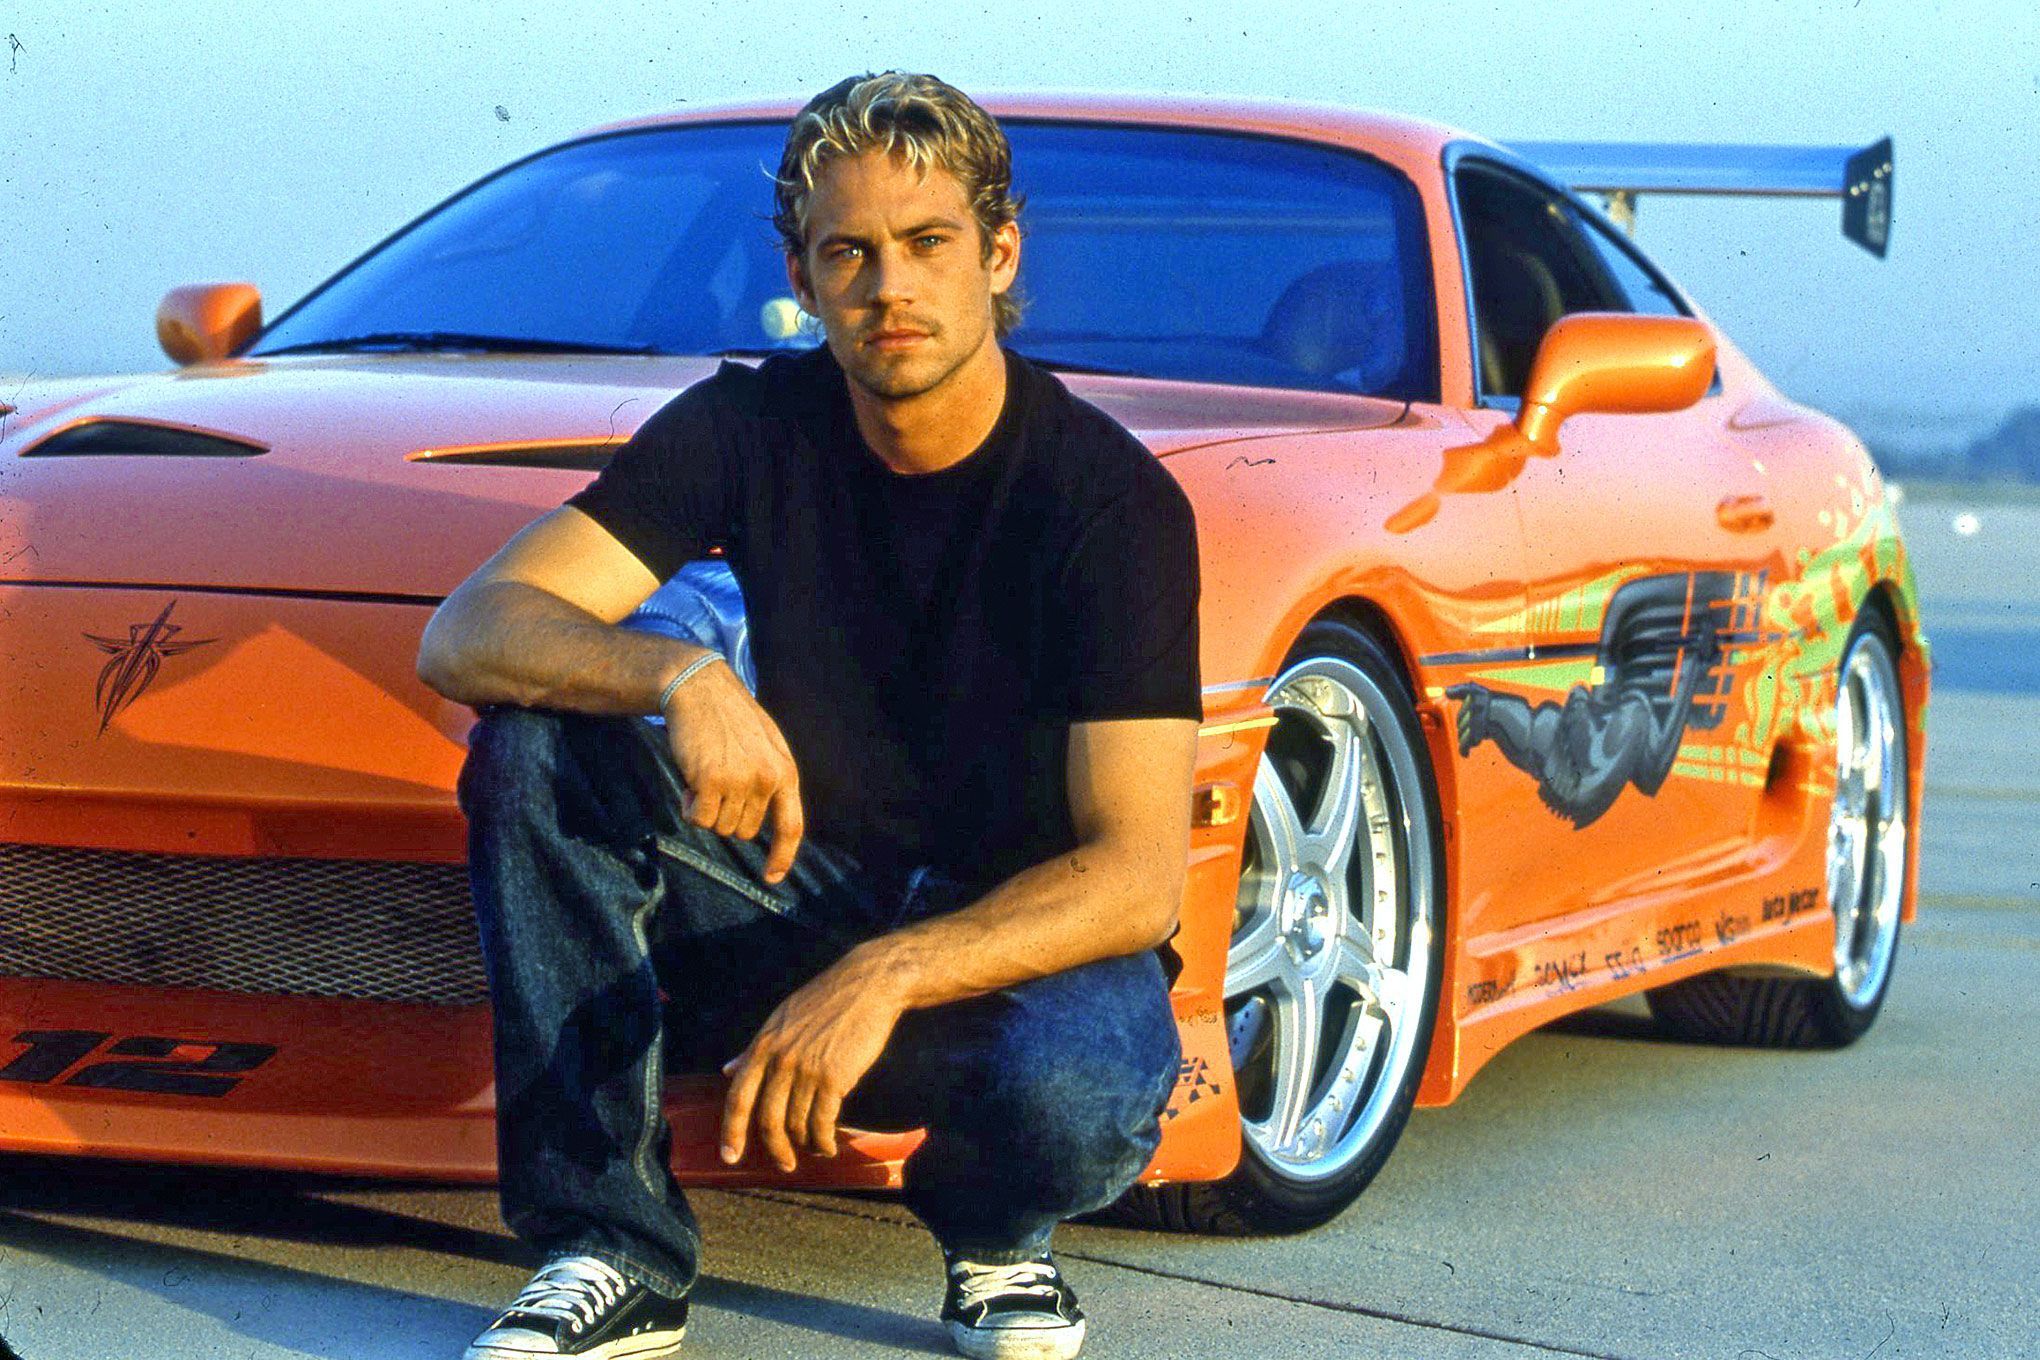 Paul Walker's 'The Fast and the Furious' car is being auctioned off. Paul walker car, Fast and furious, Paul walker